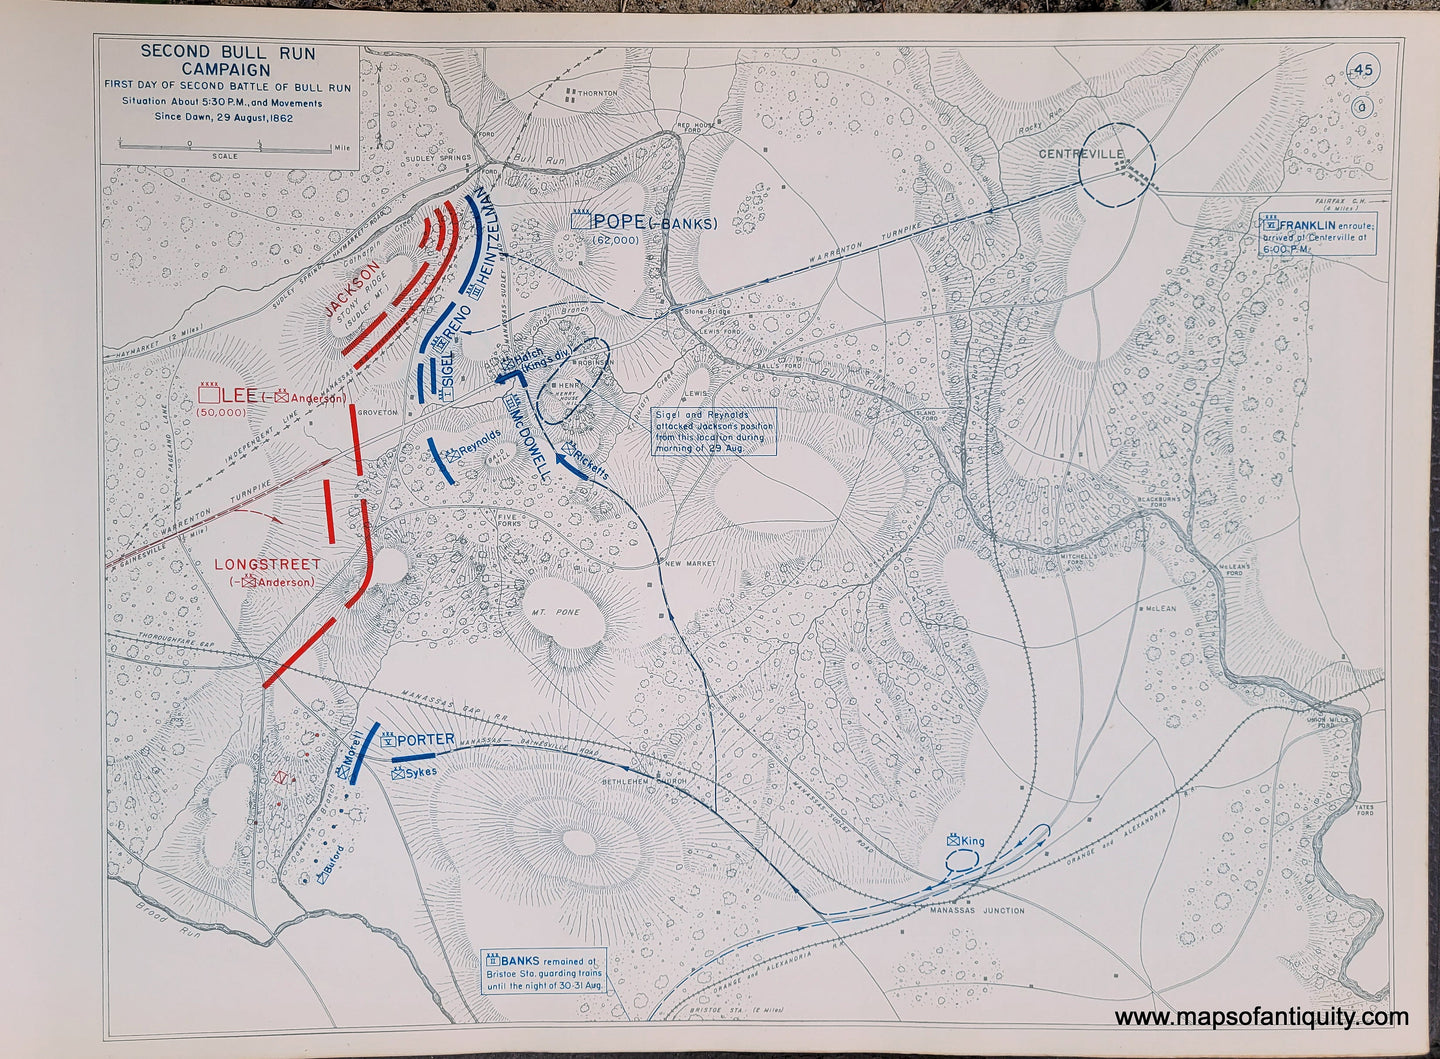 Genuine-Antique-Map-Second-Bull-Run-Campaign-First-Day-of-Second-Battle-of-Bull-Run-Situation-About-5-30-PM-and-Movements-Since-Dawn-29-August-1862-1948-Matthew-Forney-Steele-Dept-of-Military-Art-and-Engineering-US-Military-Academy-West-Point-Maps-Of-Antiquity